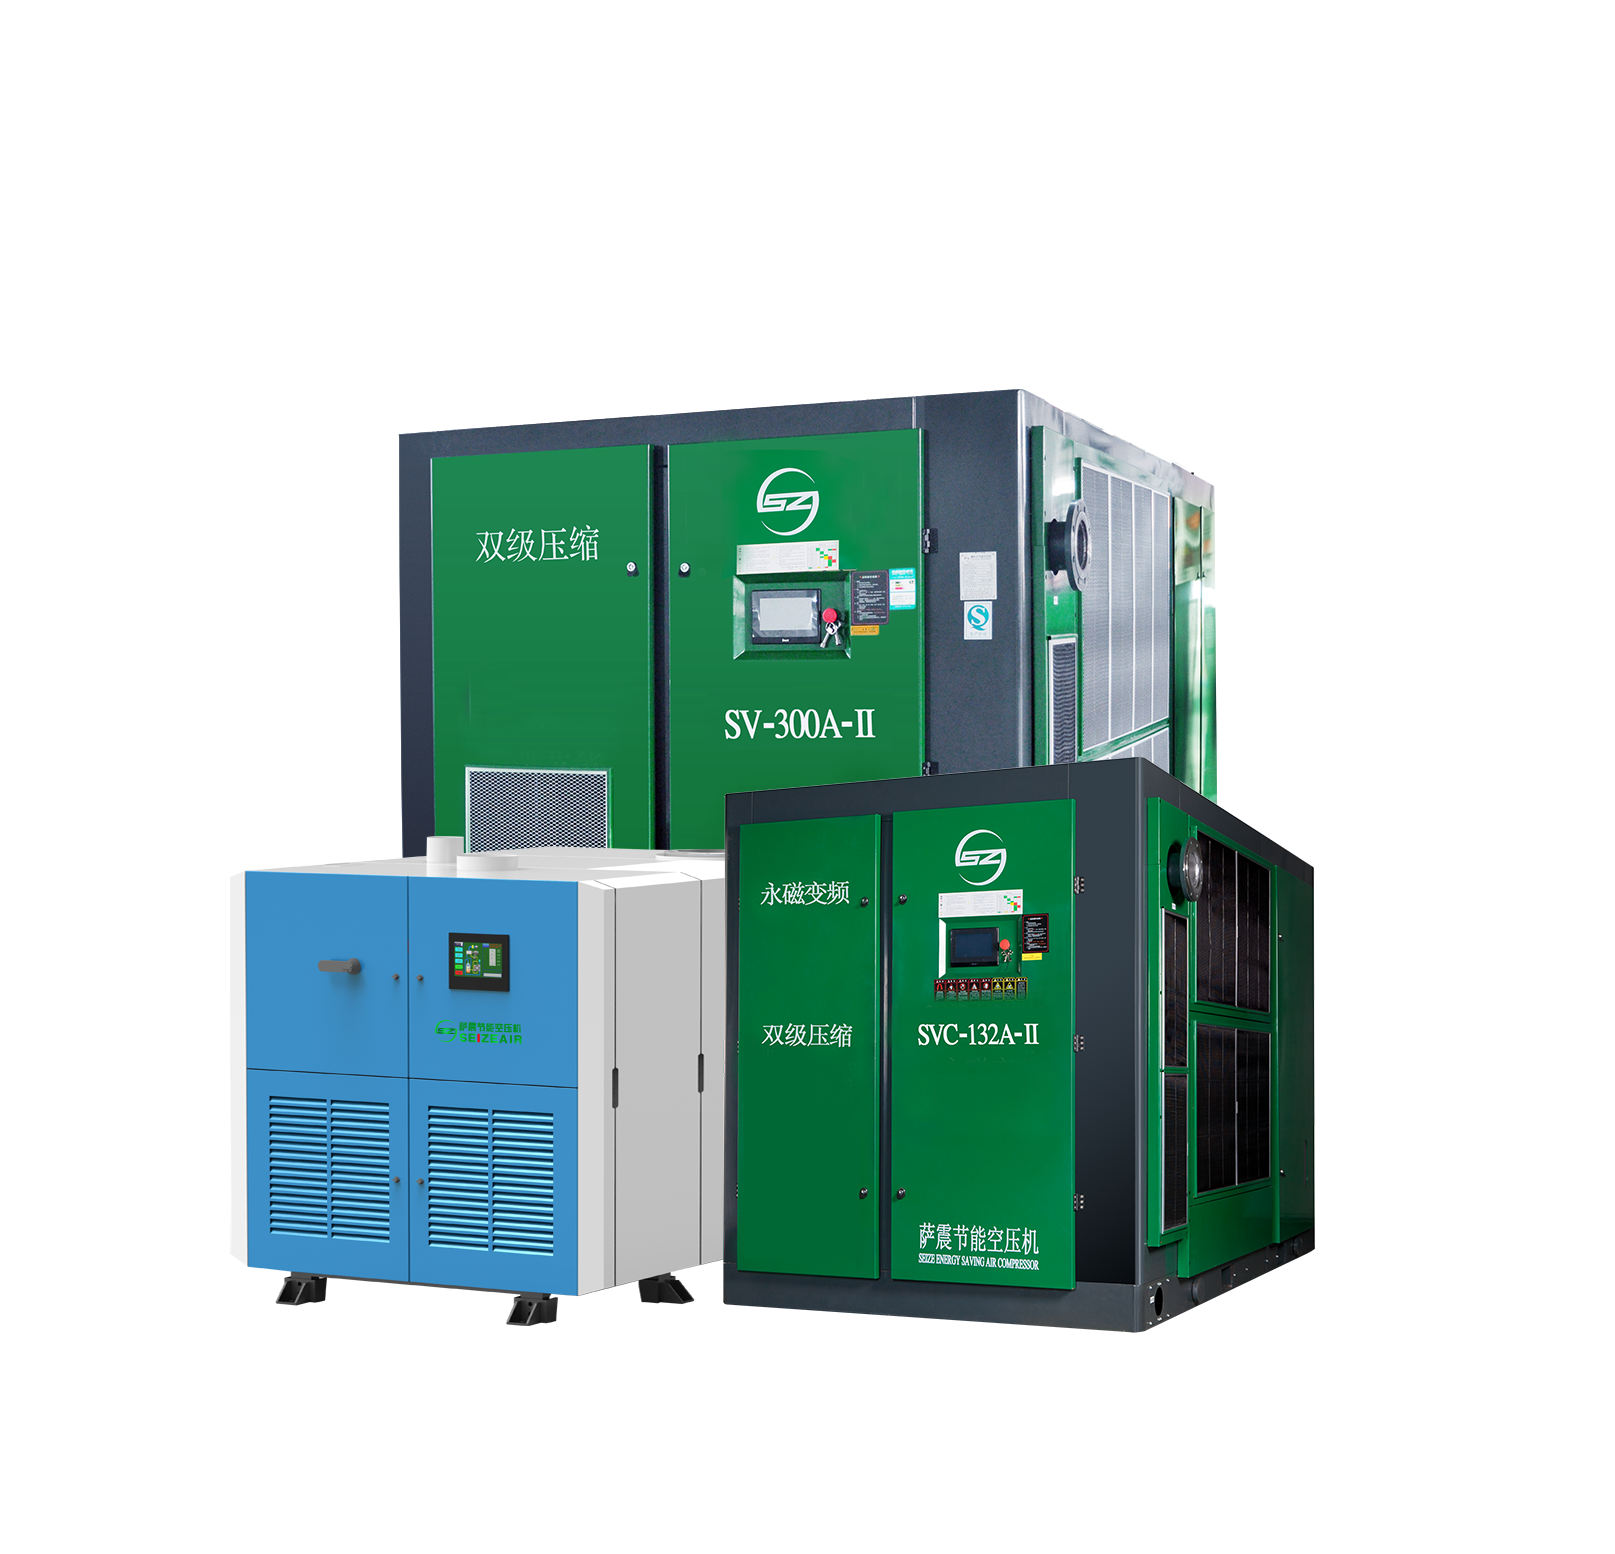 Seize 2 stage +PMM+VFD more save energy